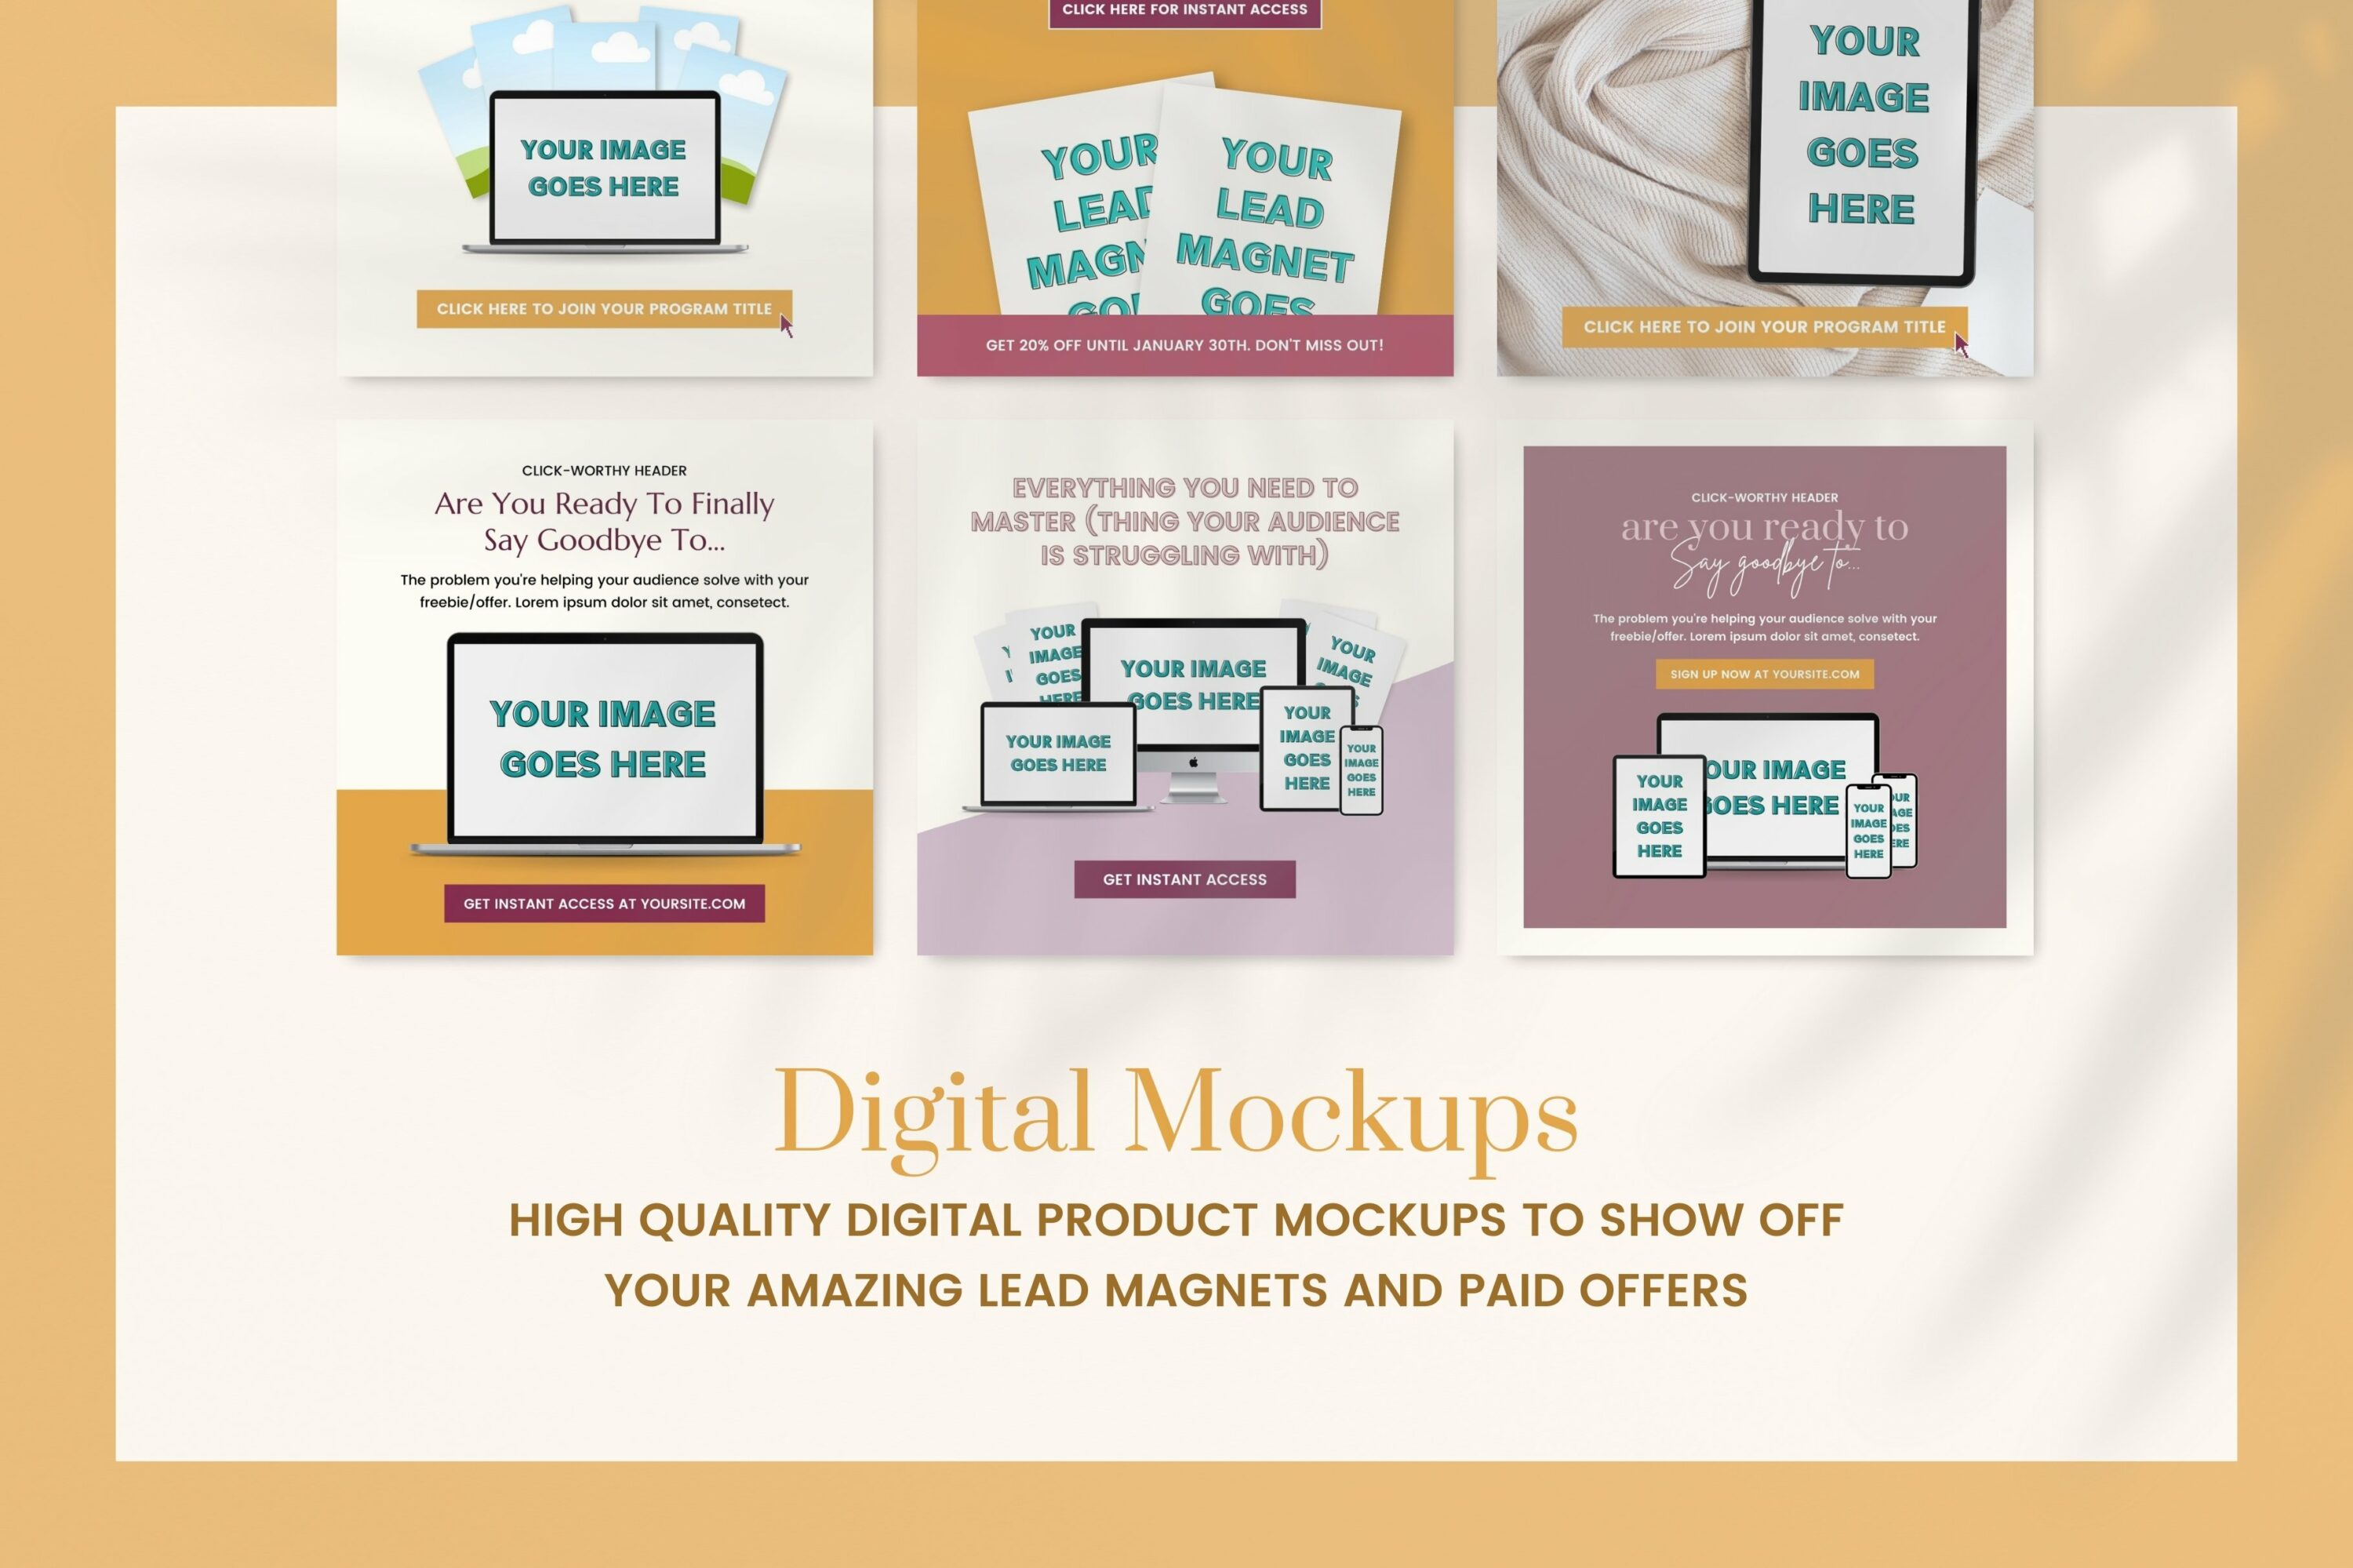 High quality digital product mockups to show off your amazing lead magnets.